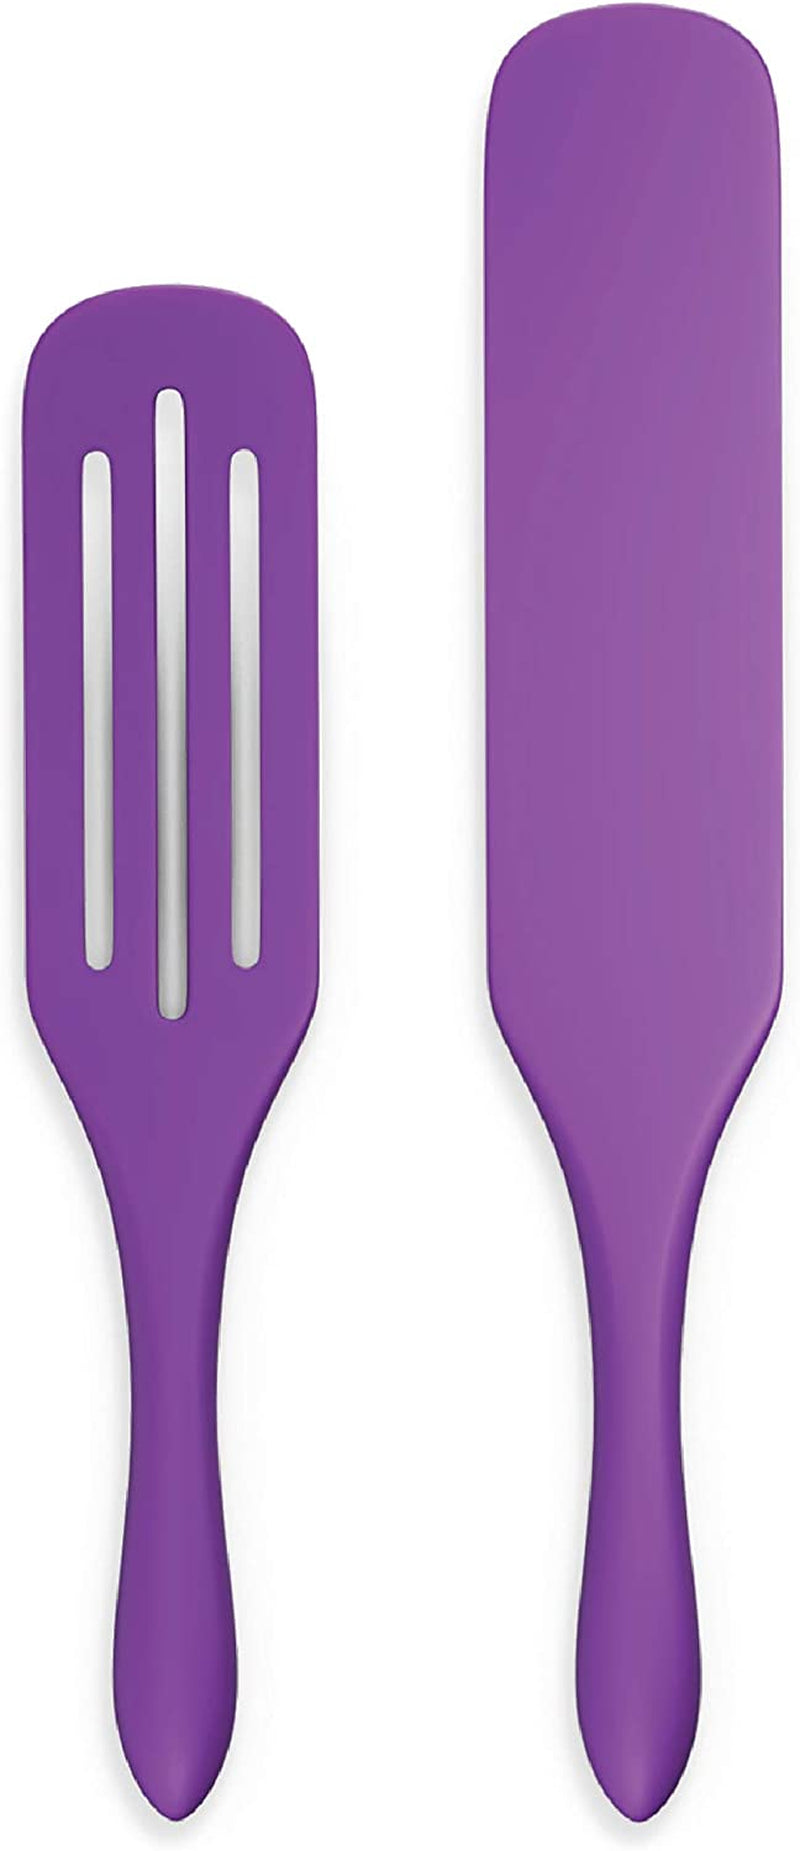 Mad Hungry Spurtle Silicone Set 2-Piece - Kitchen Spatula Spoon Tools for Cooking, Narrow Jar Scraper, Mixing Spoons, Icing Cake & Frosting Knife Spreader, Slim & Slotted Thin Paddle Spurtles Utensil